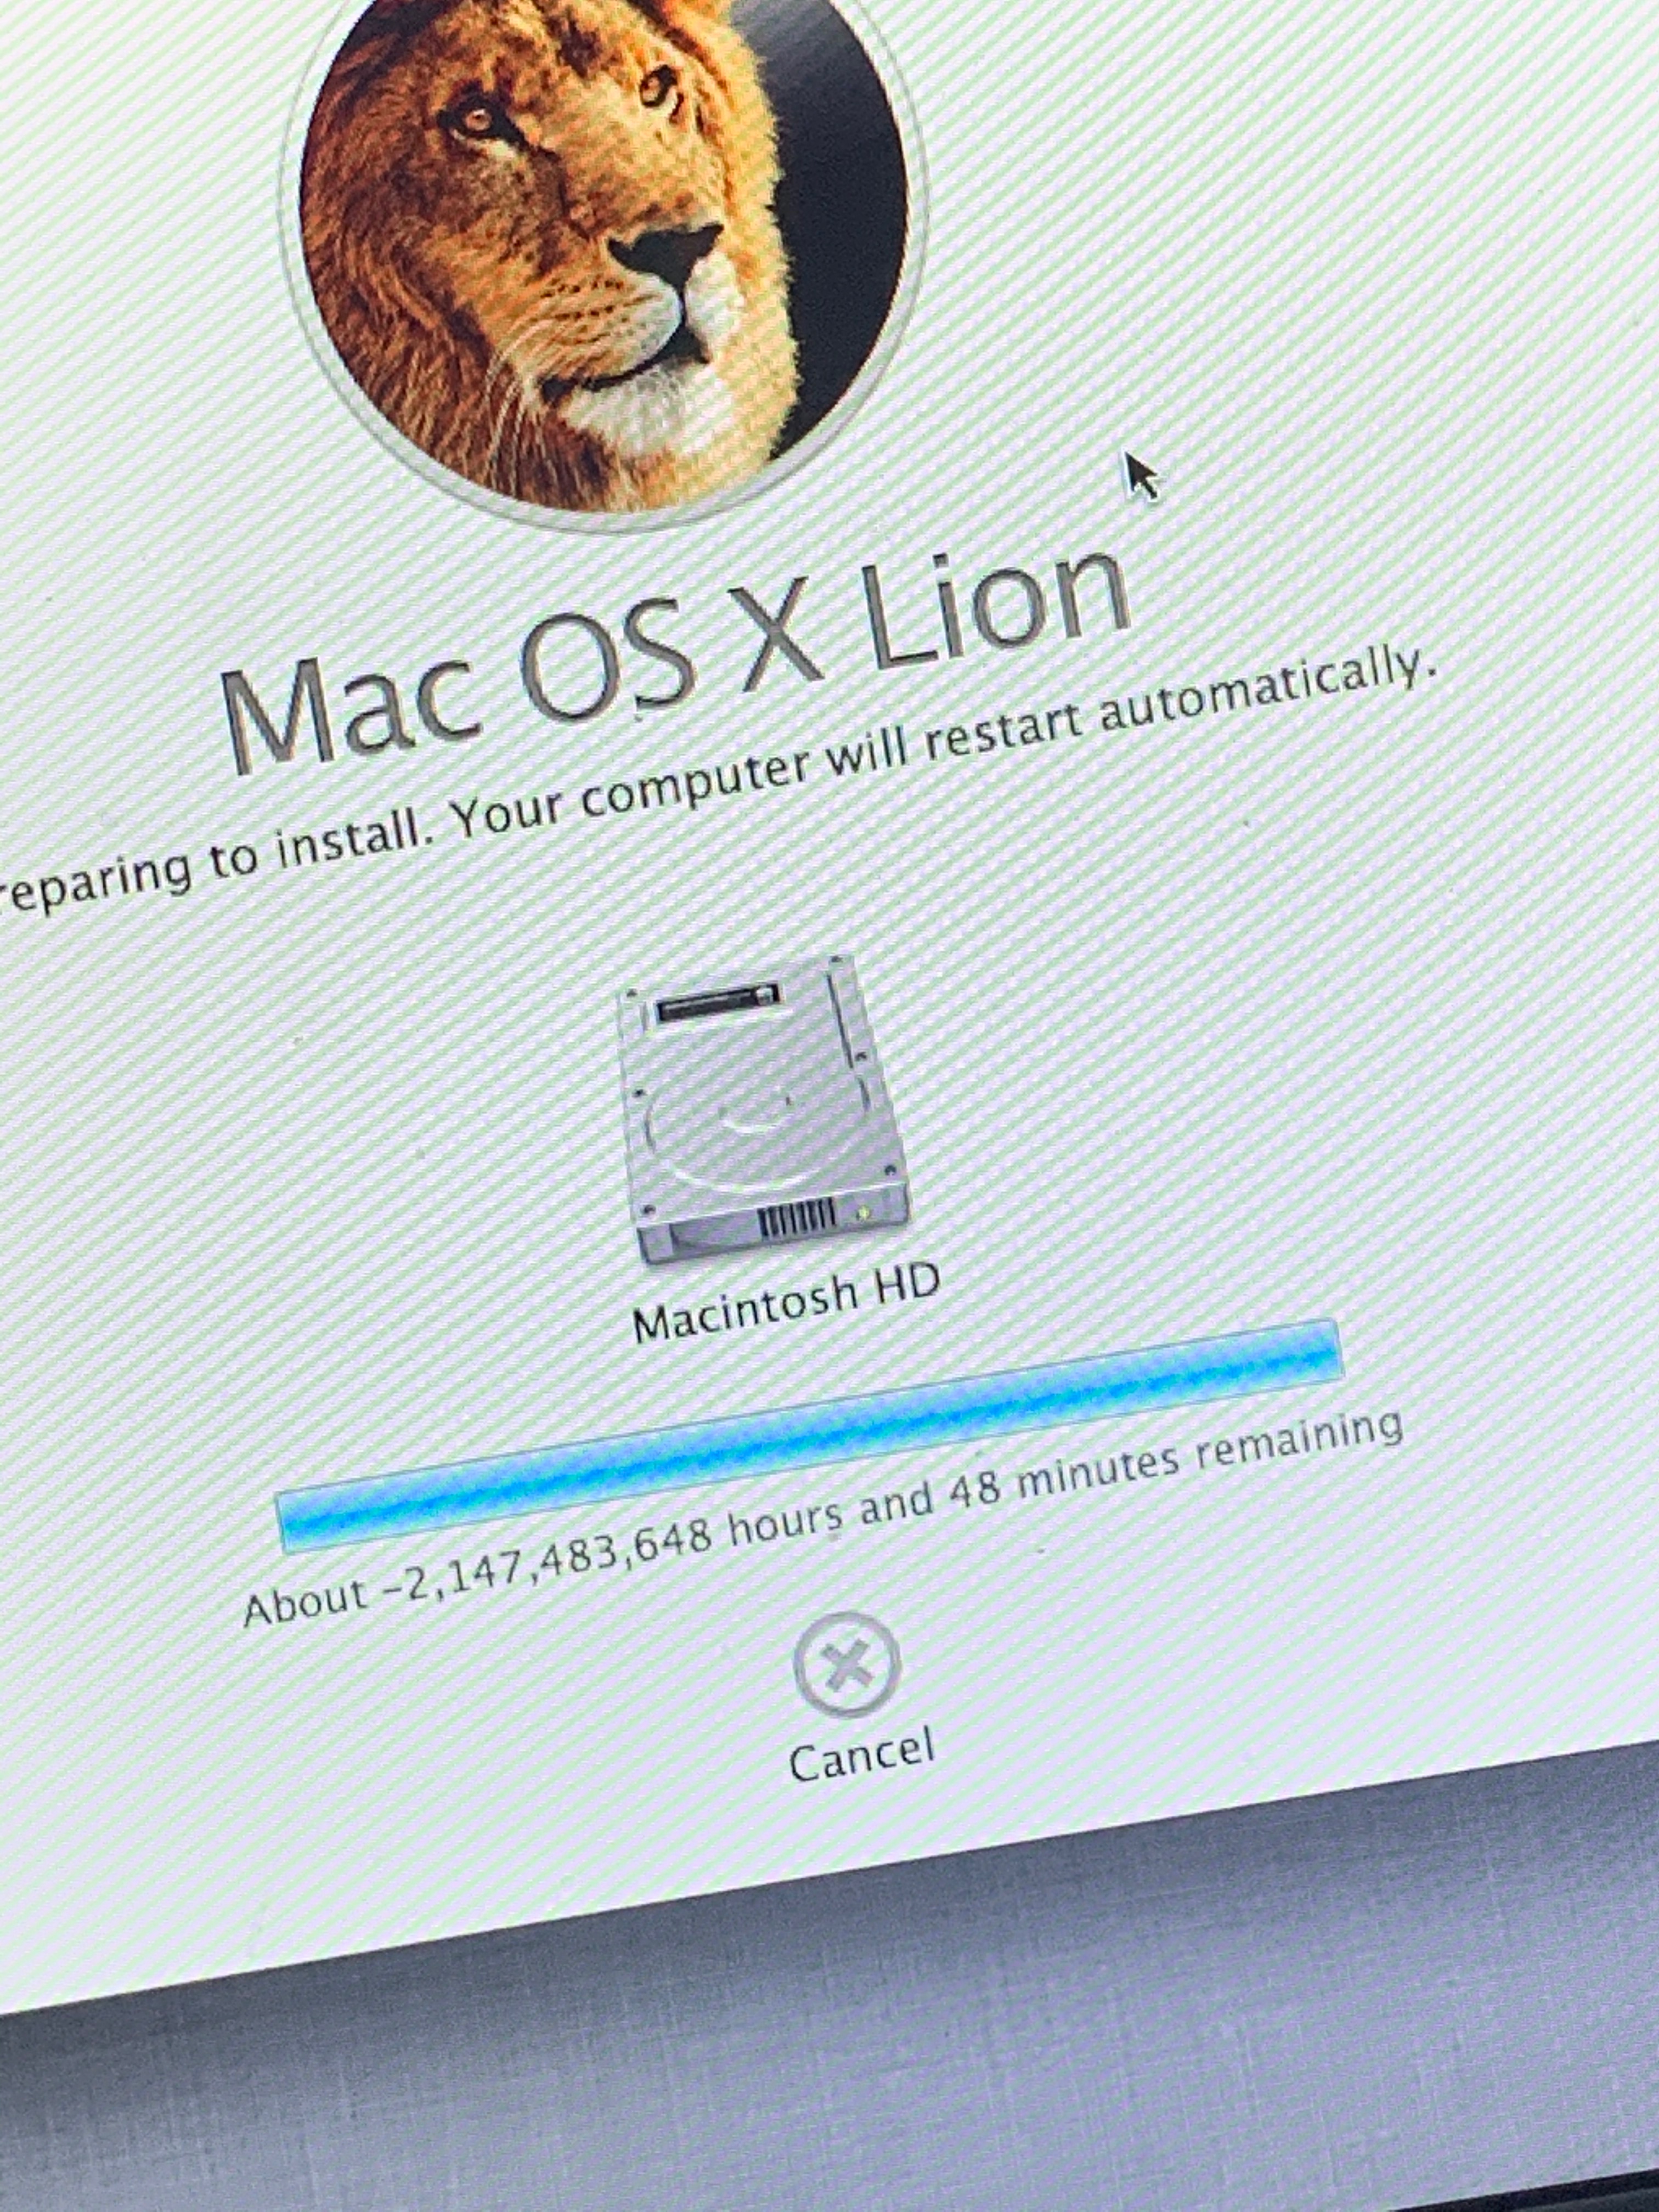 install mac os x lion cant download additional components